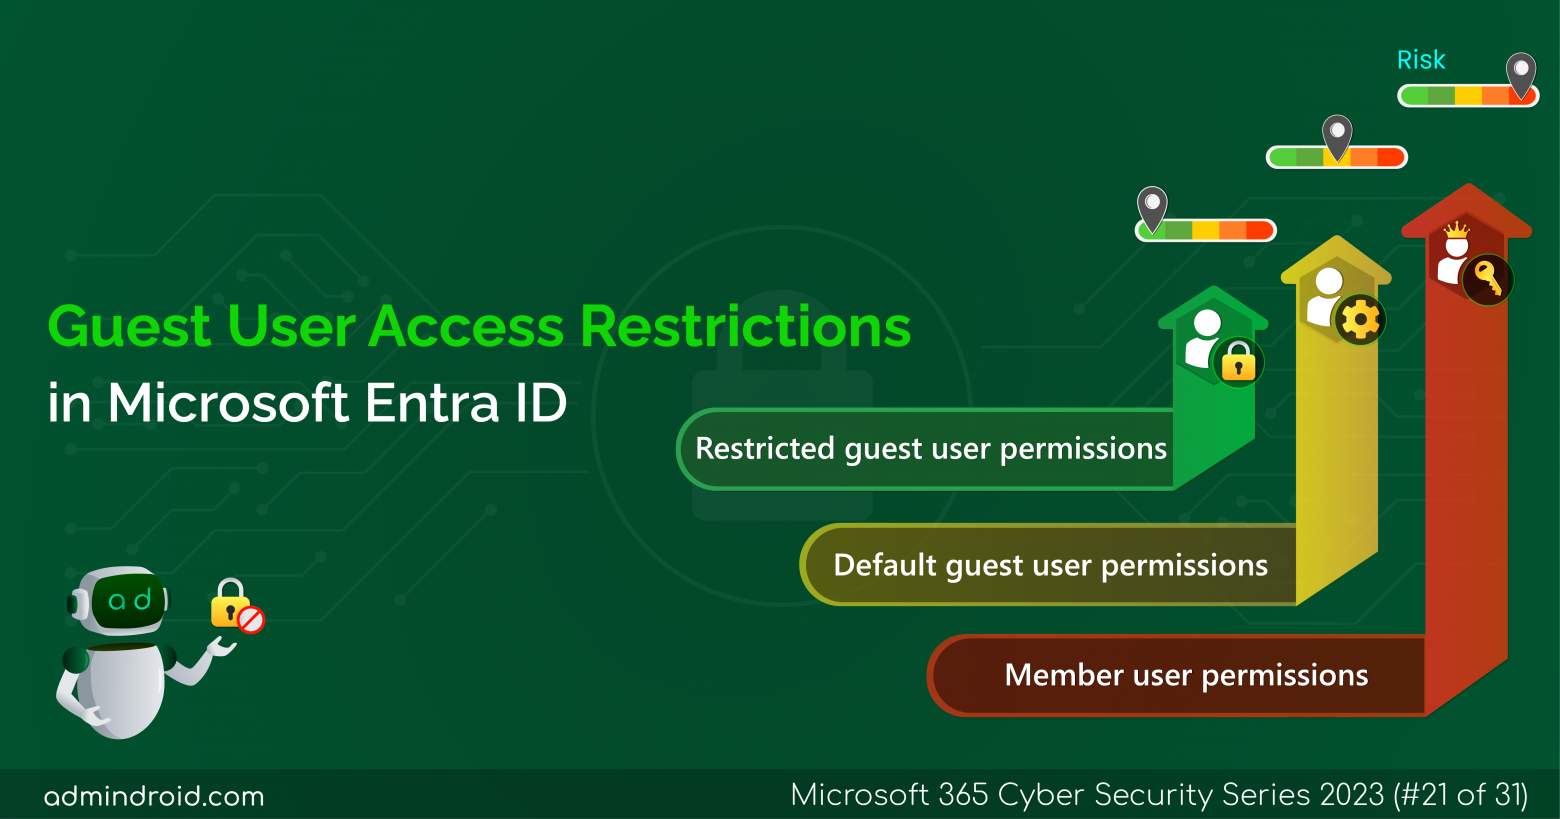 Guest User Access Restrictions in Microsoft Entra ID